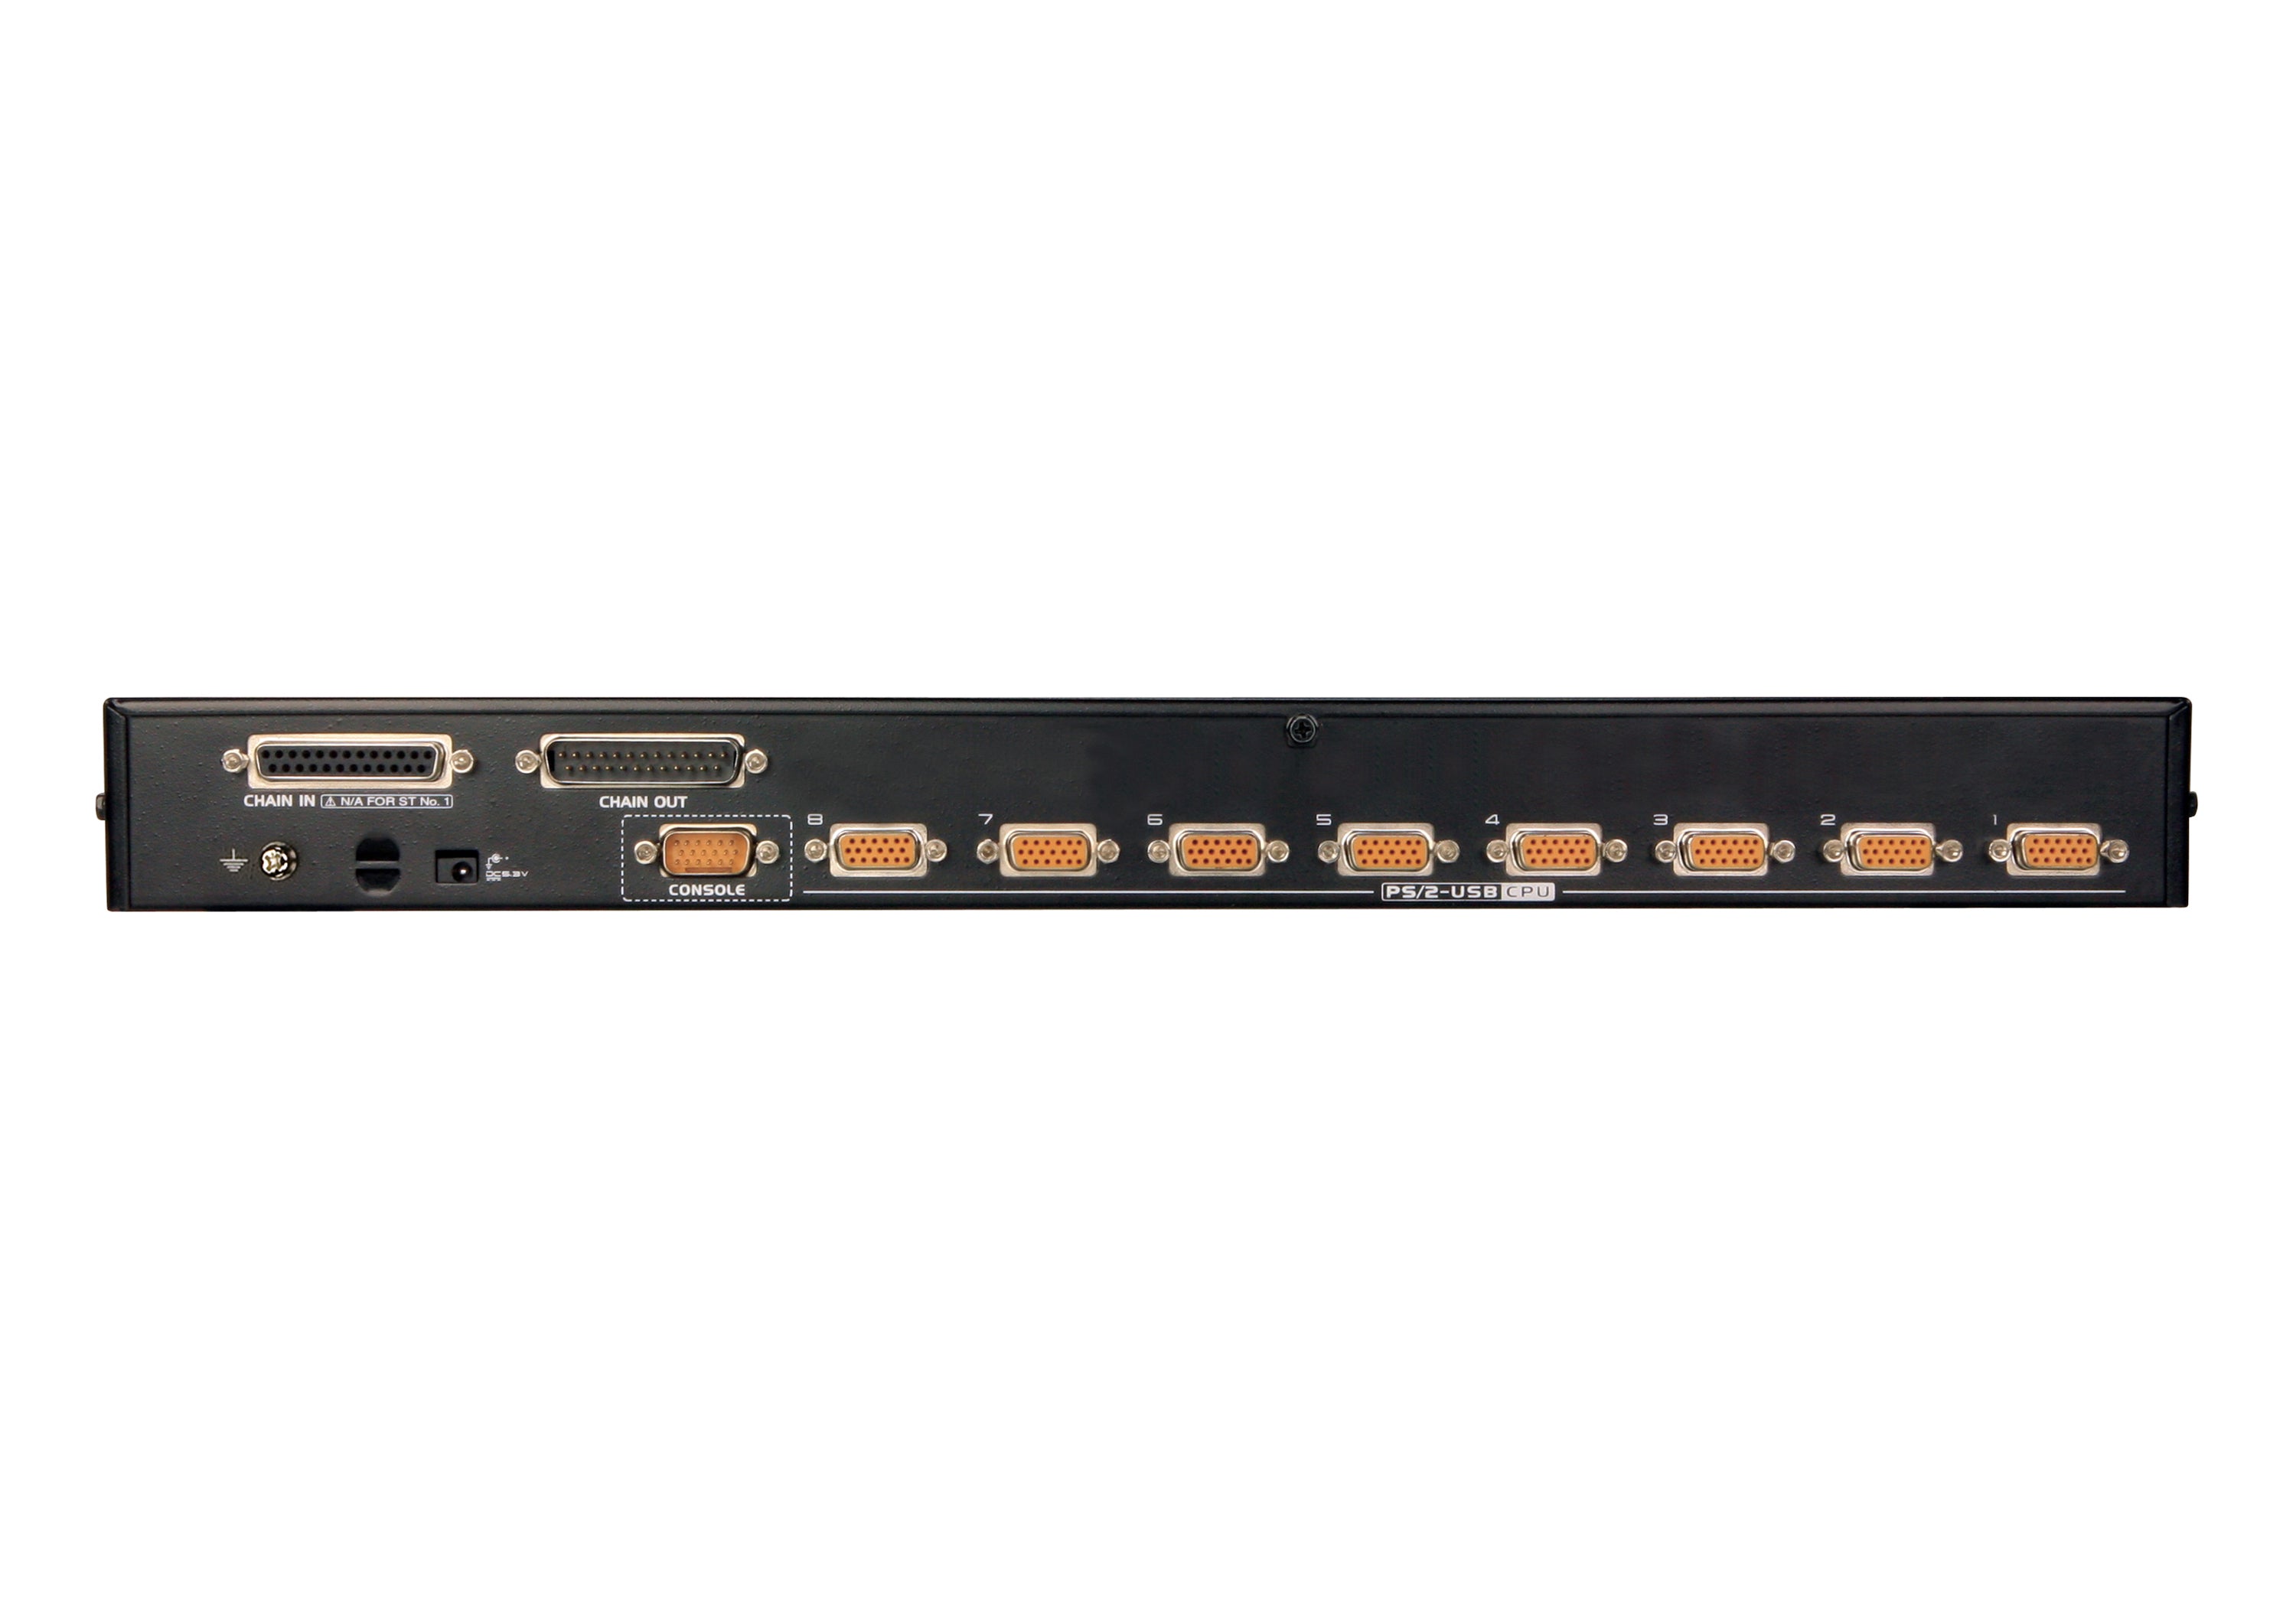 Aten 16-Port PS/2-USB VGA KVM Switch with Daisy-Chain Port and USB Peripheral Support- CS1716A (1 Year Manufacture Local Warranty In Singapore)